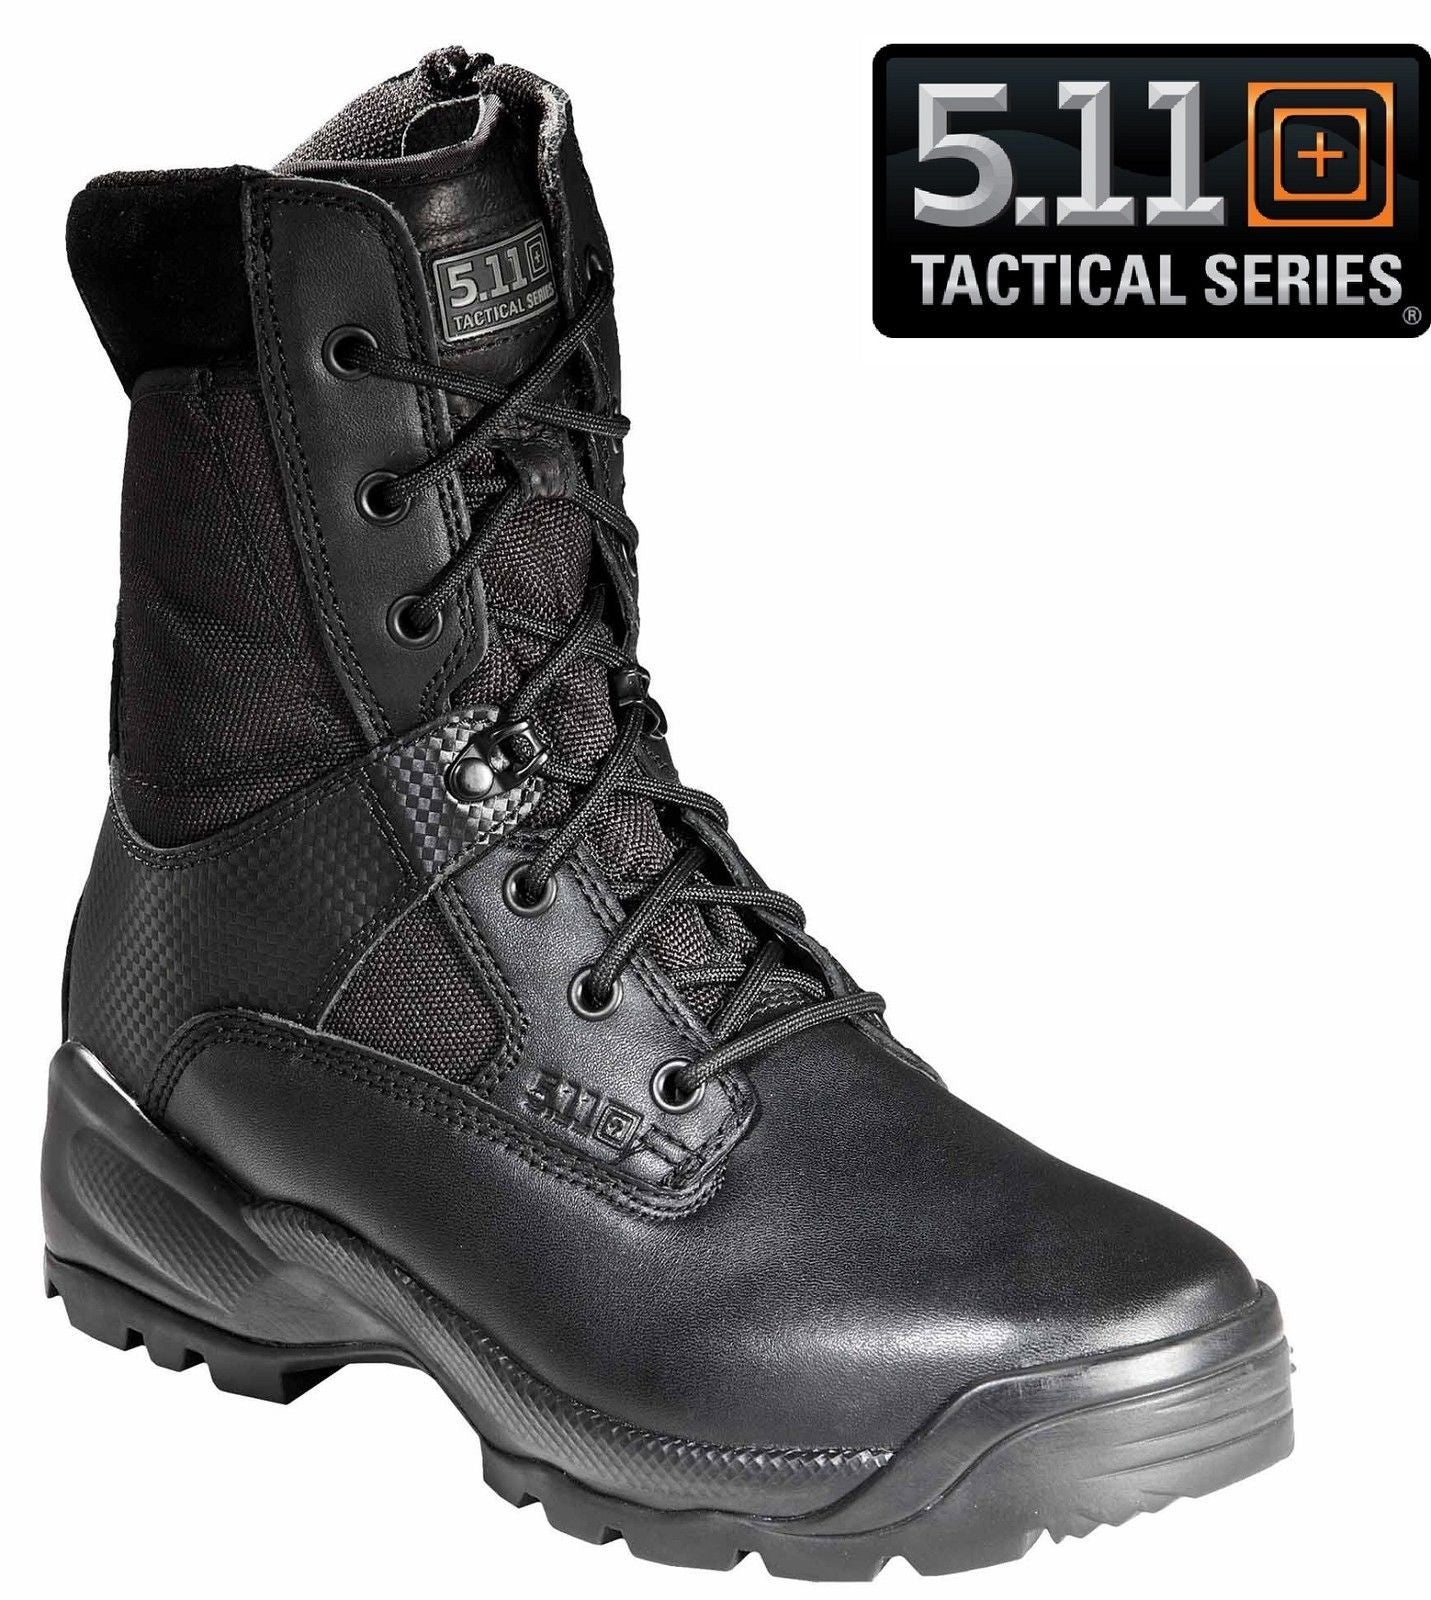 5.11 Tactical Womens 8" Black ATAC Side Zip Work Boots Womans Field Duty Boot